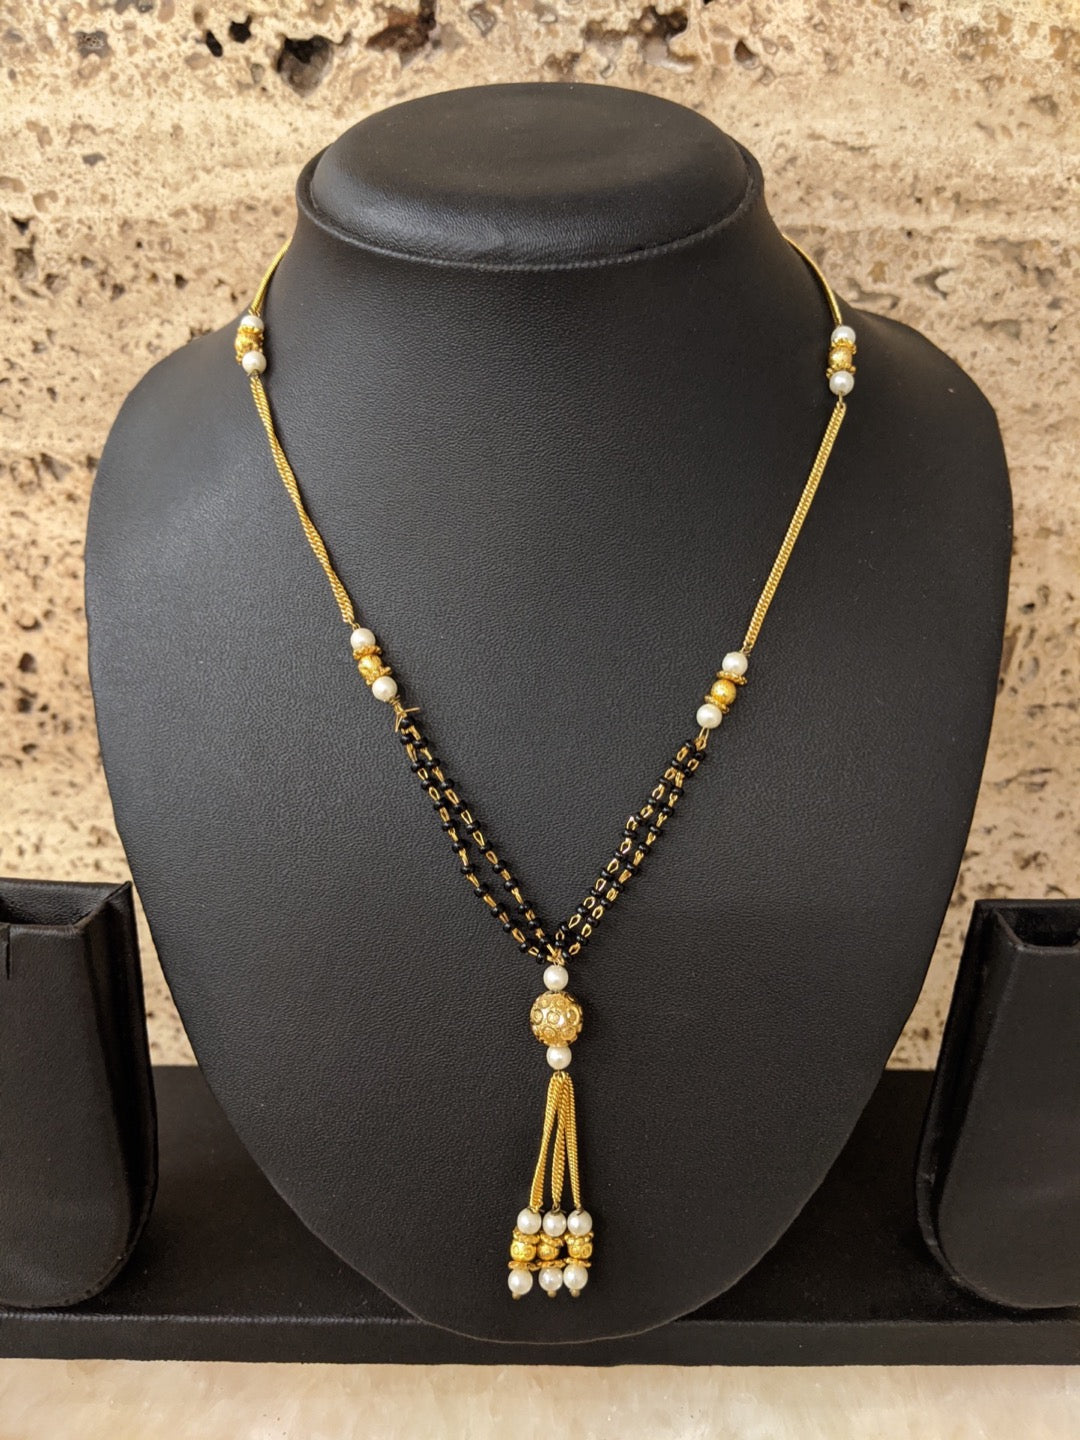 image for Short Mangalsutra Designs gold mangalsutra Ball Shape pendant with latkan gold black beads chain